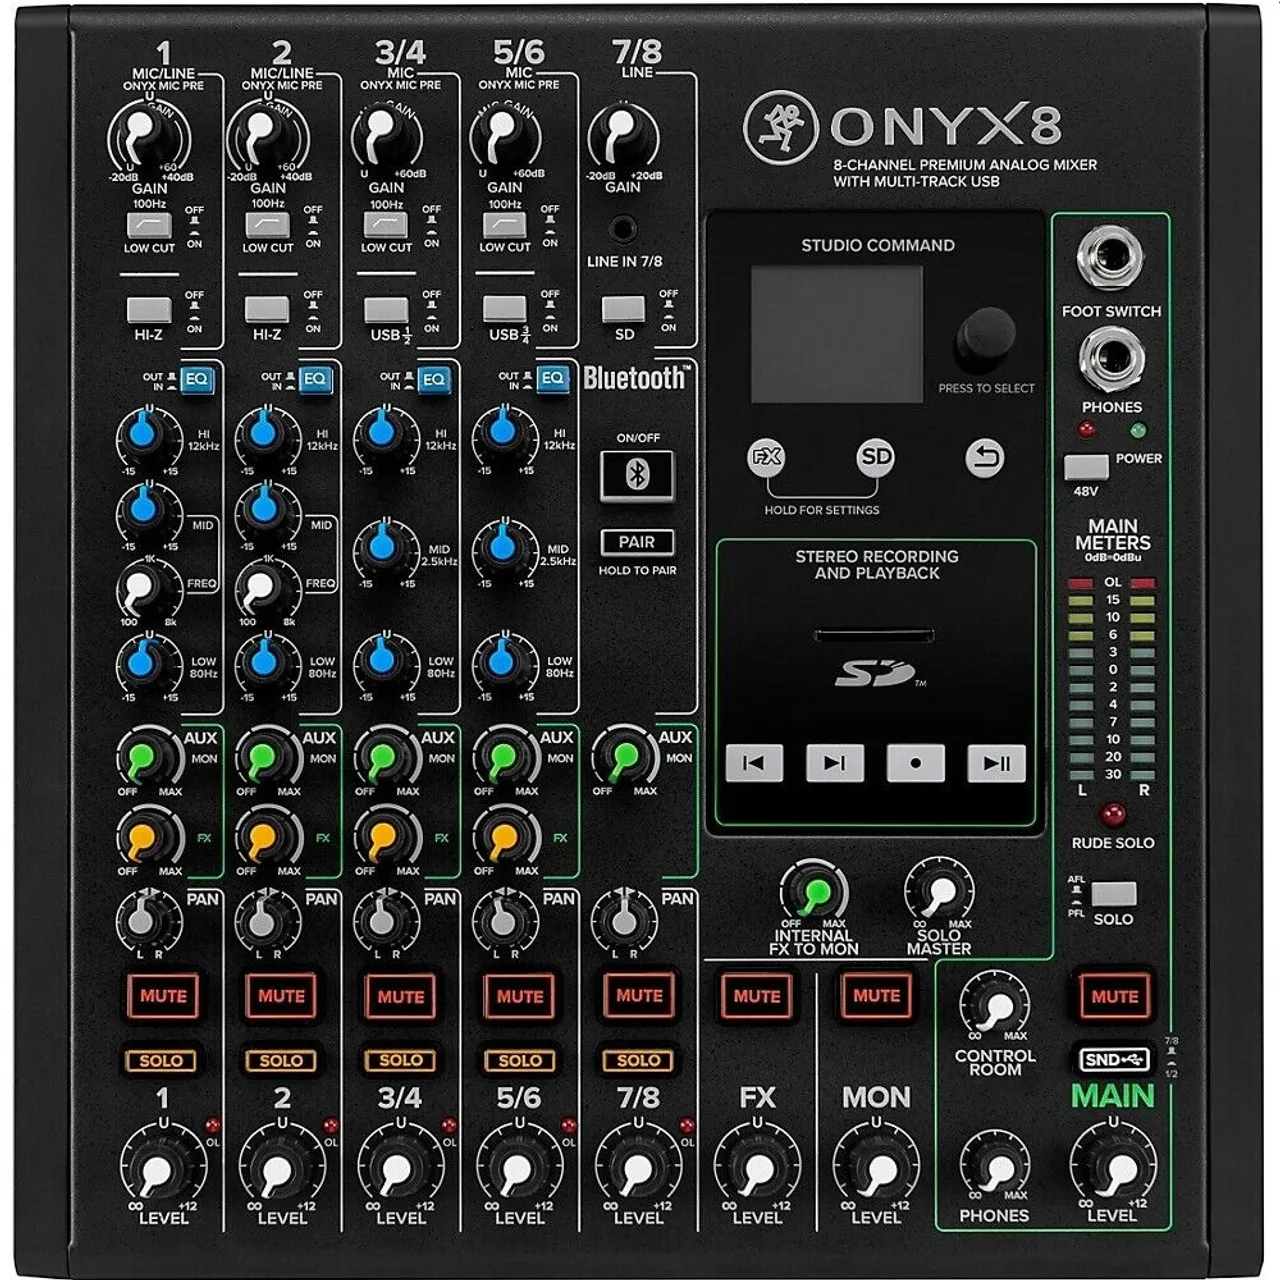 

100% OFFICIAL Mackie Onyx24 24-channel Analog Mixer with Multi-track USB